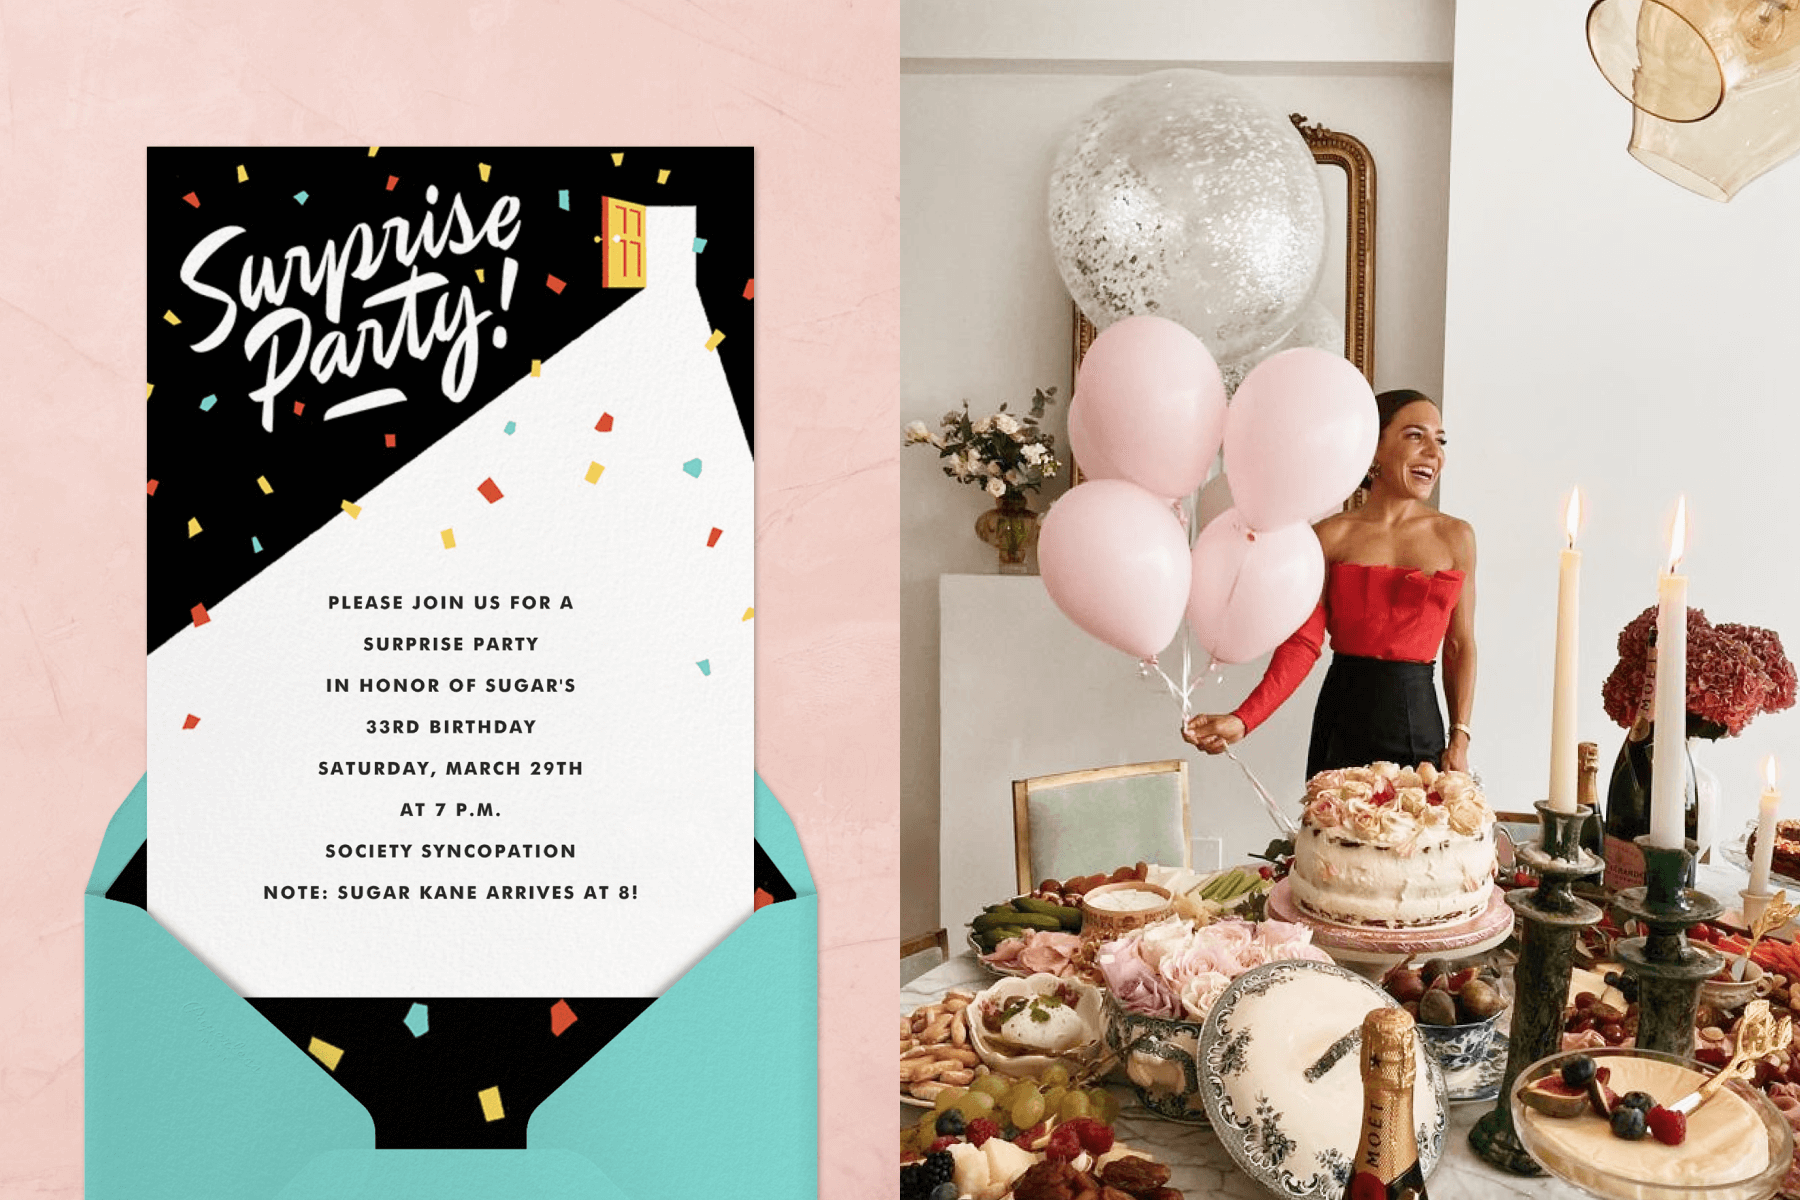 Left: A surprise party invitation shows a small door opening in the upper right corner streaming light into a black room with rainbow confetti. Right: A woman in a red top and black bottoms stands holding oversized baby pink and glitter balloons behind a table loaded with desserts, flowers, and taper candles.